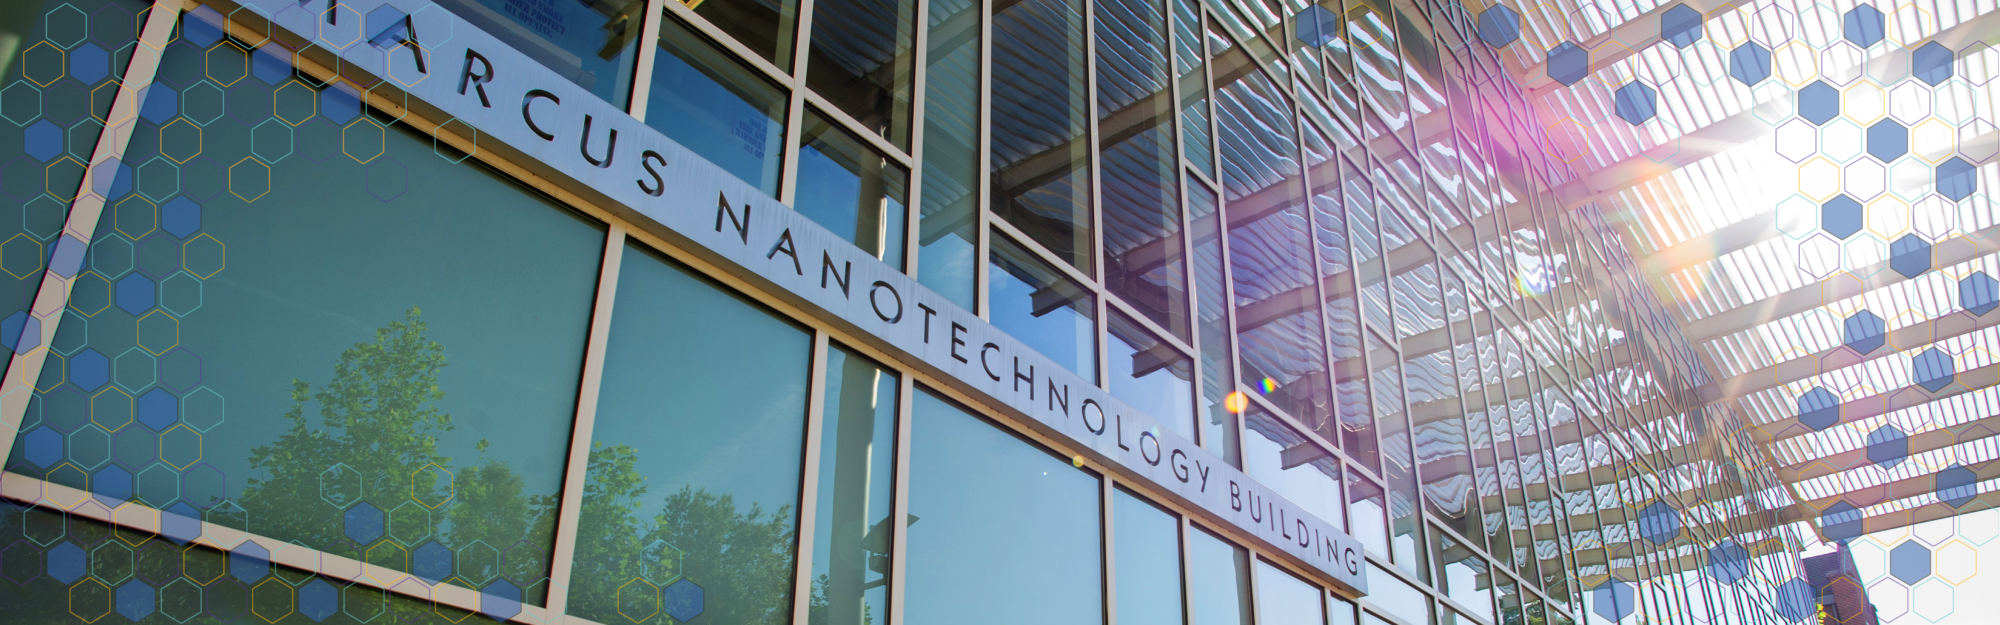 Front of the Marcus Nanotechnology Building